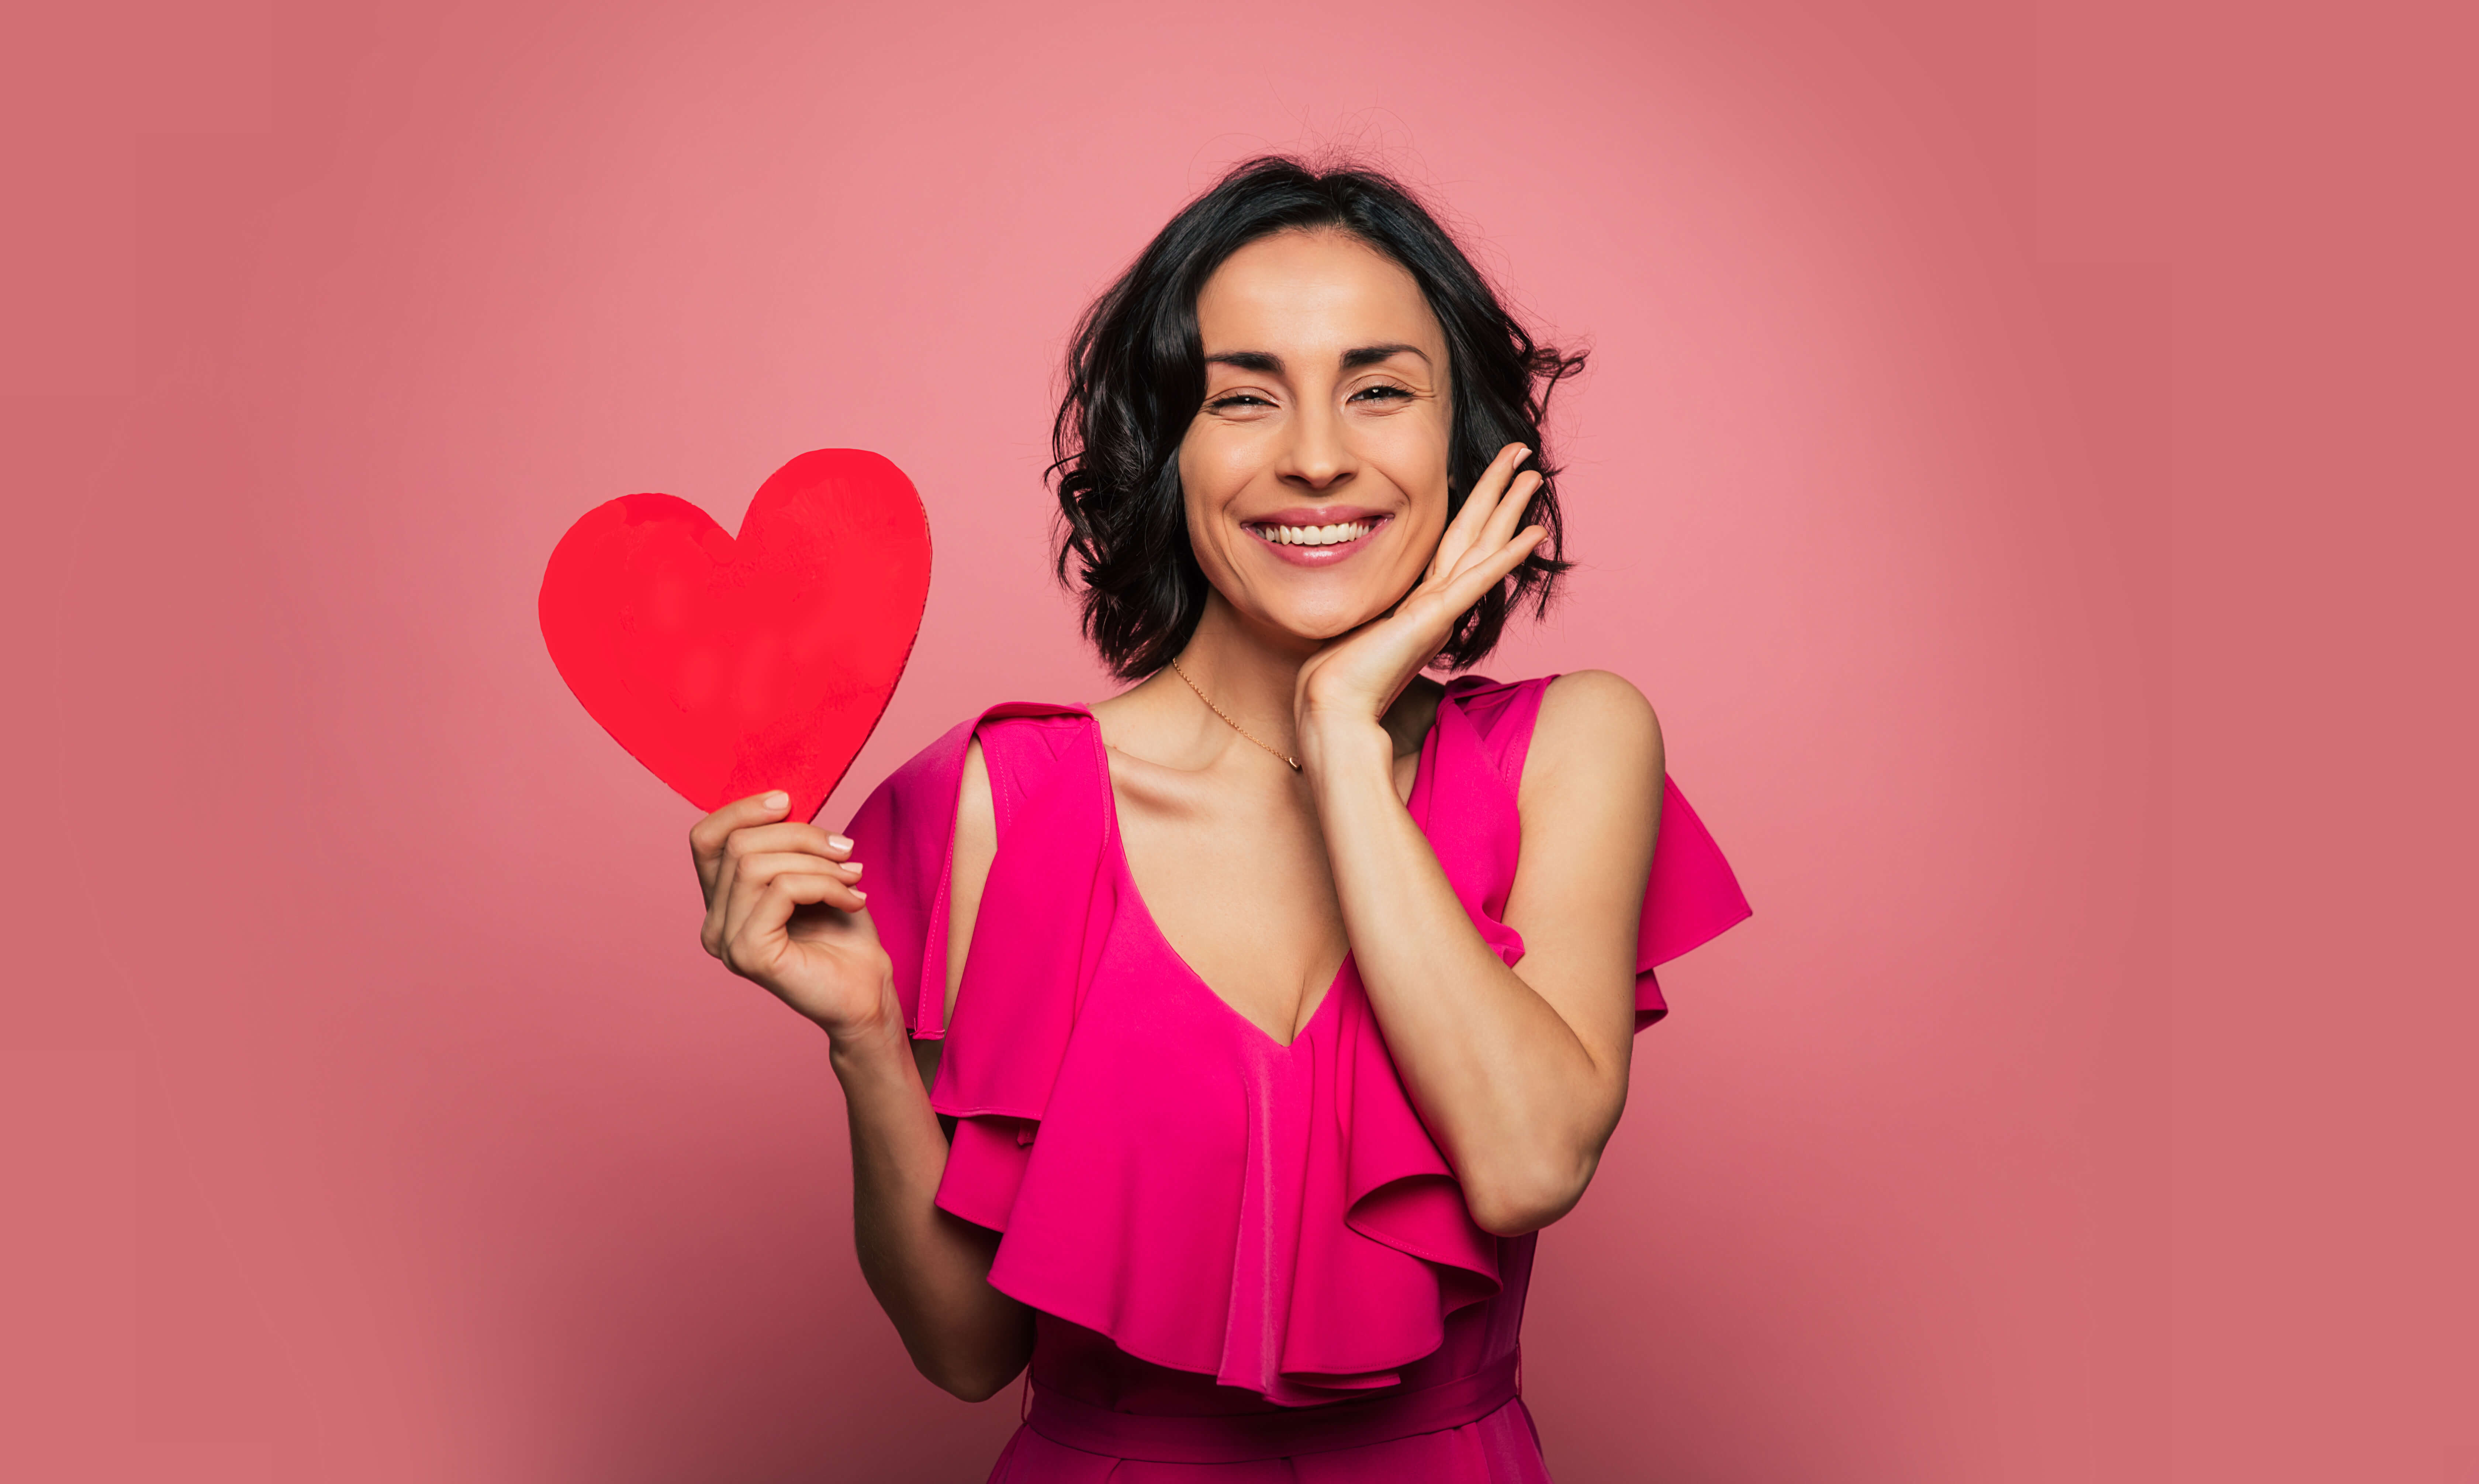 photo of woman smiling while holding a paper heart